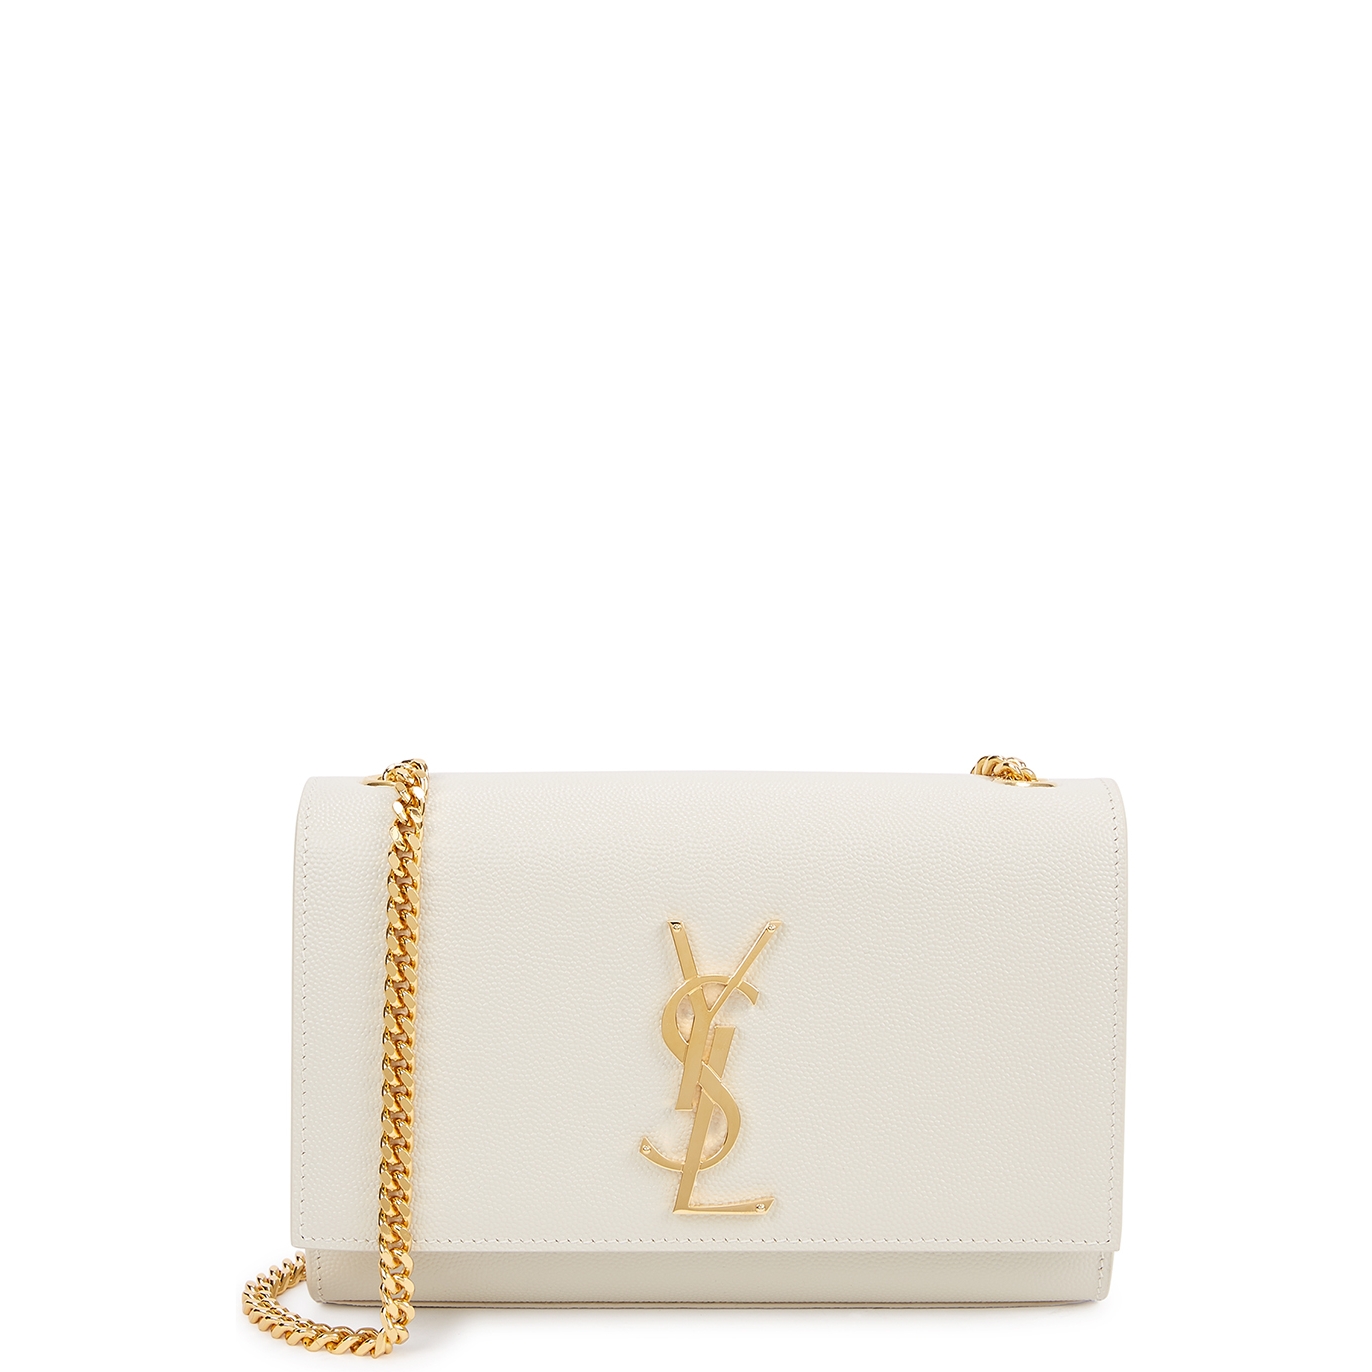 Saint Laurent Kate Small White Leather Shoulder Bag In Gold